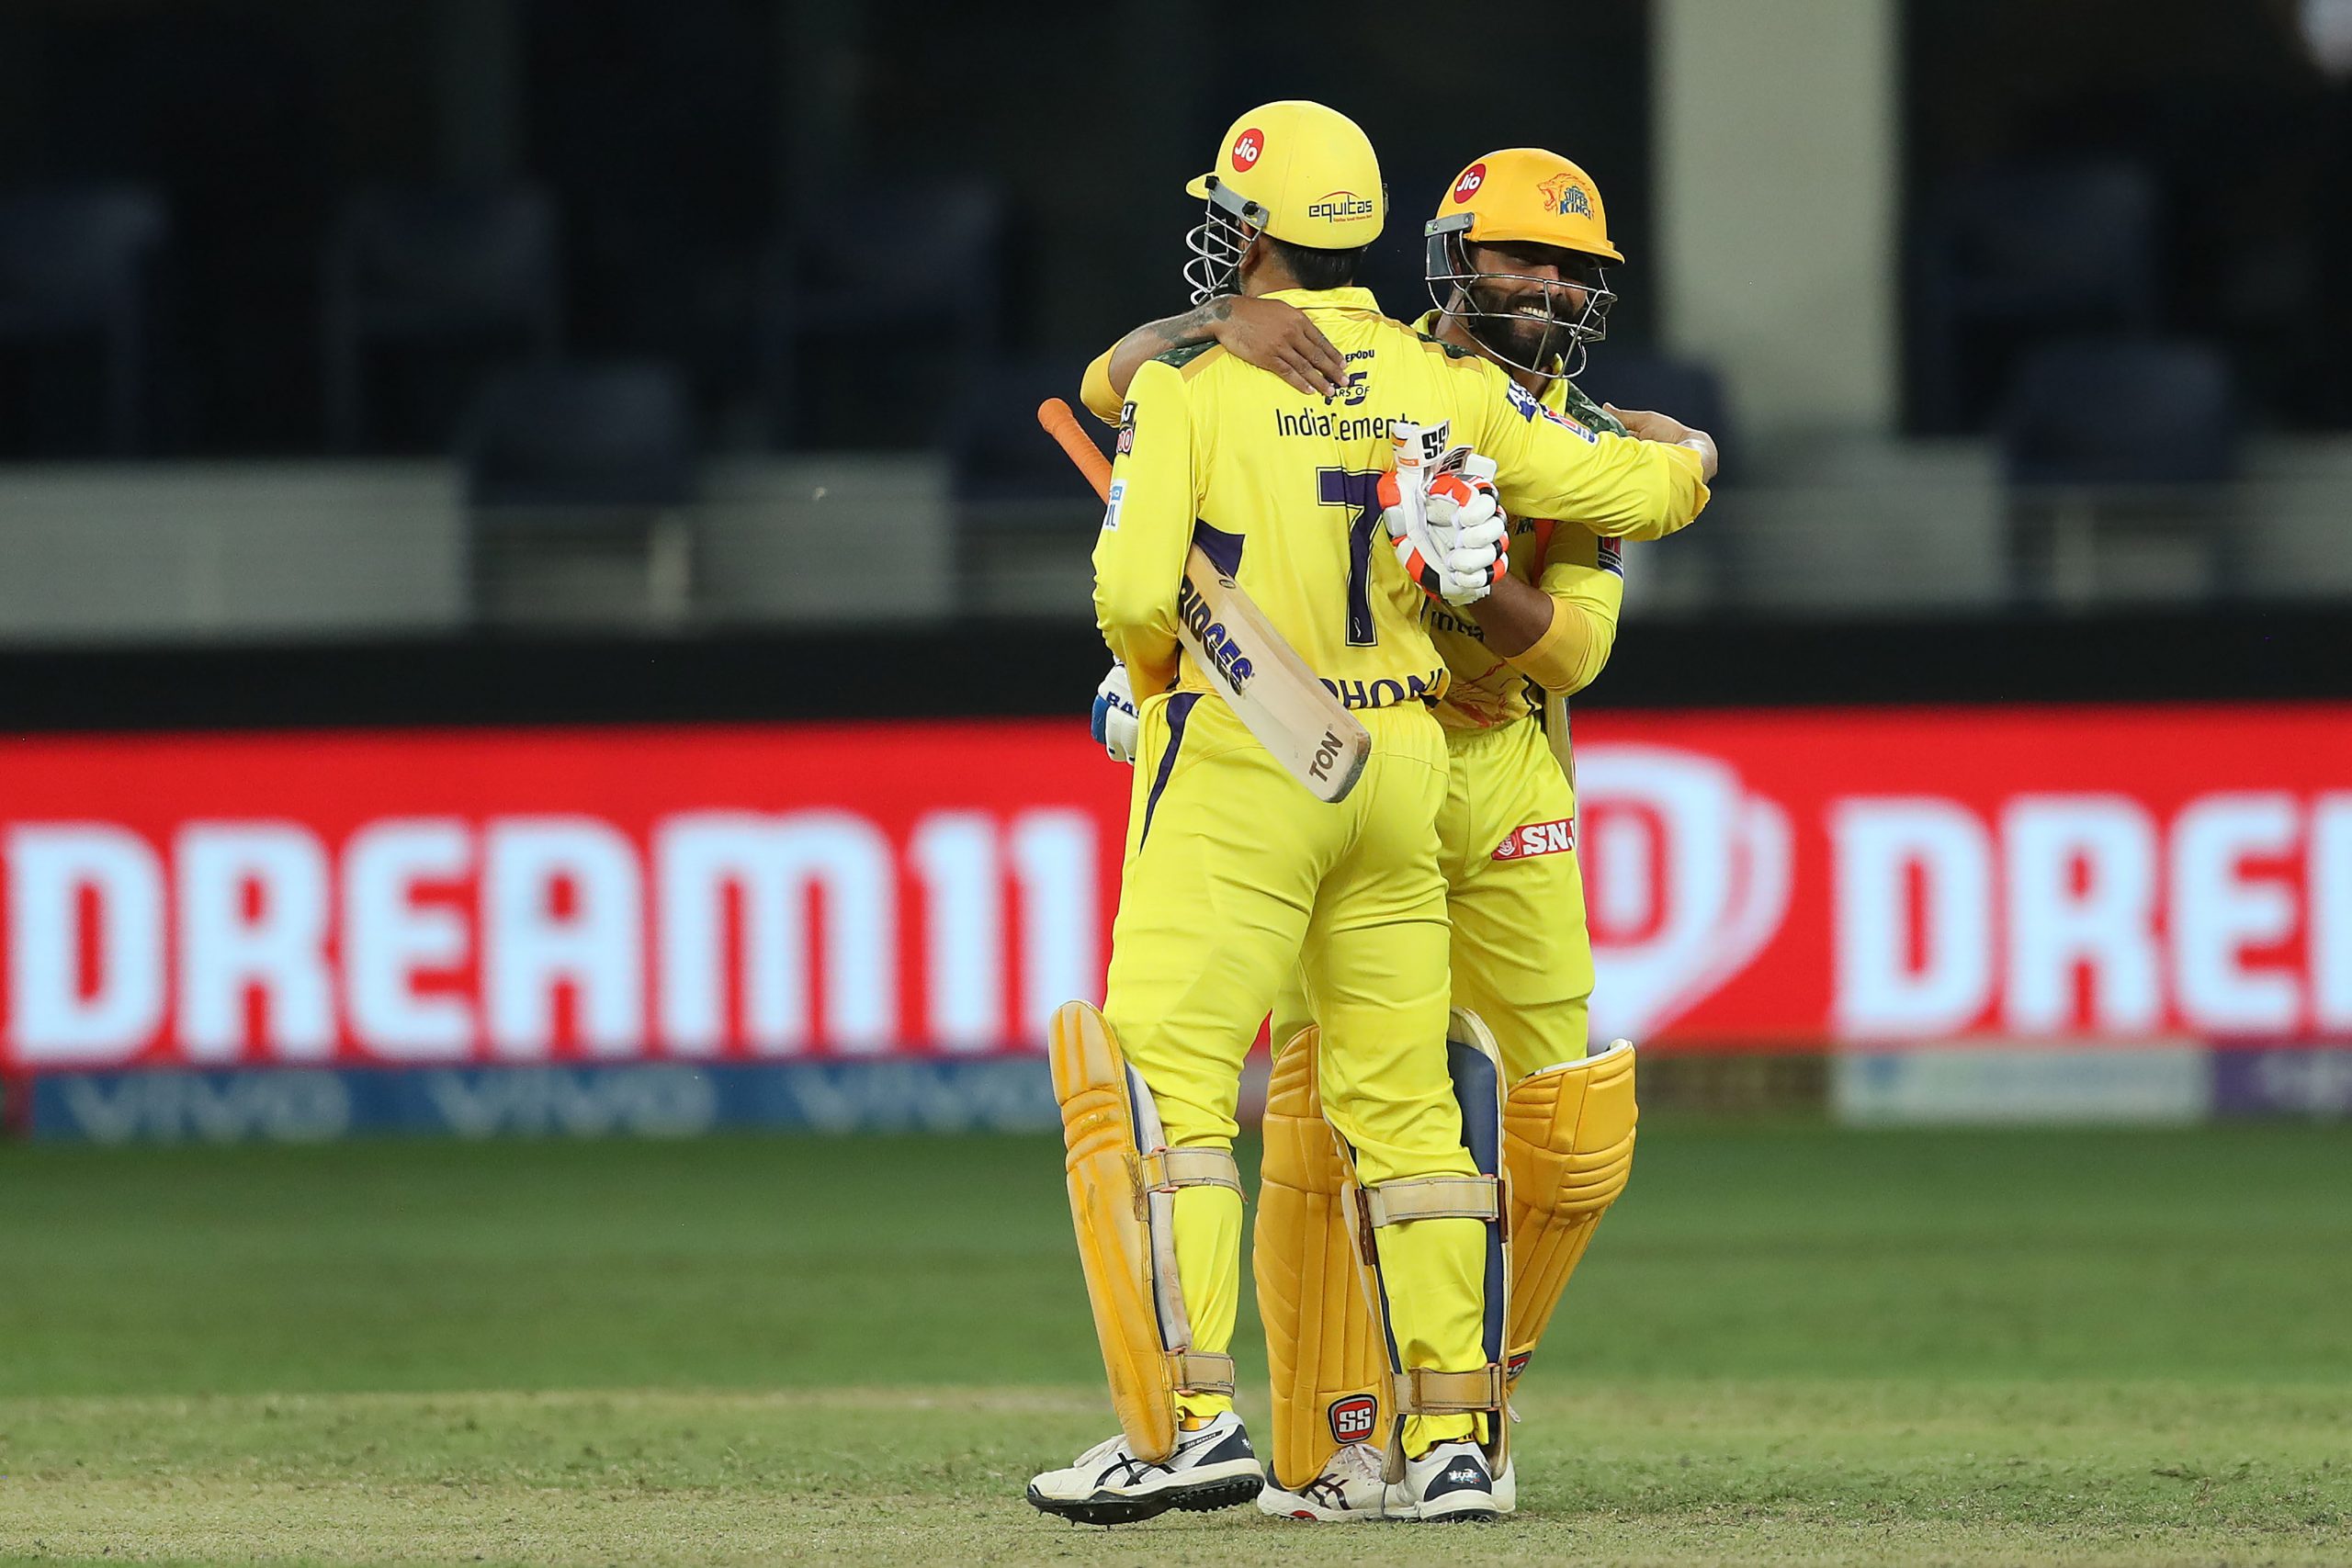 MS Dhoni moves Chennai Super Kings fans to tears with knock against Delhi Capitals